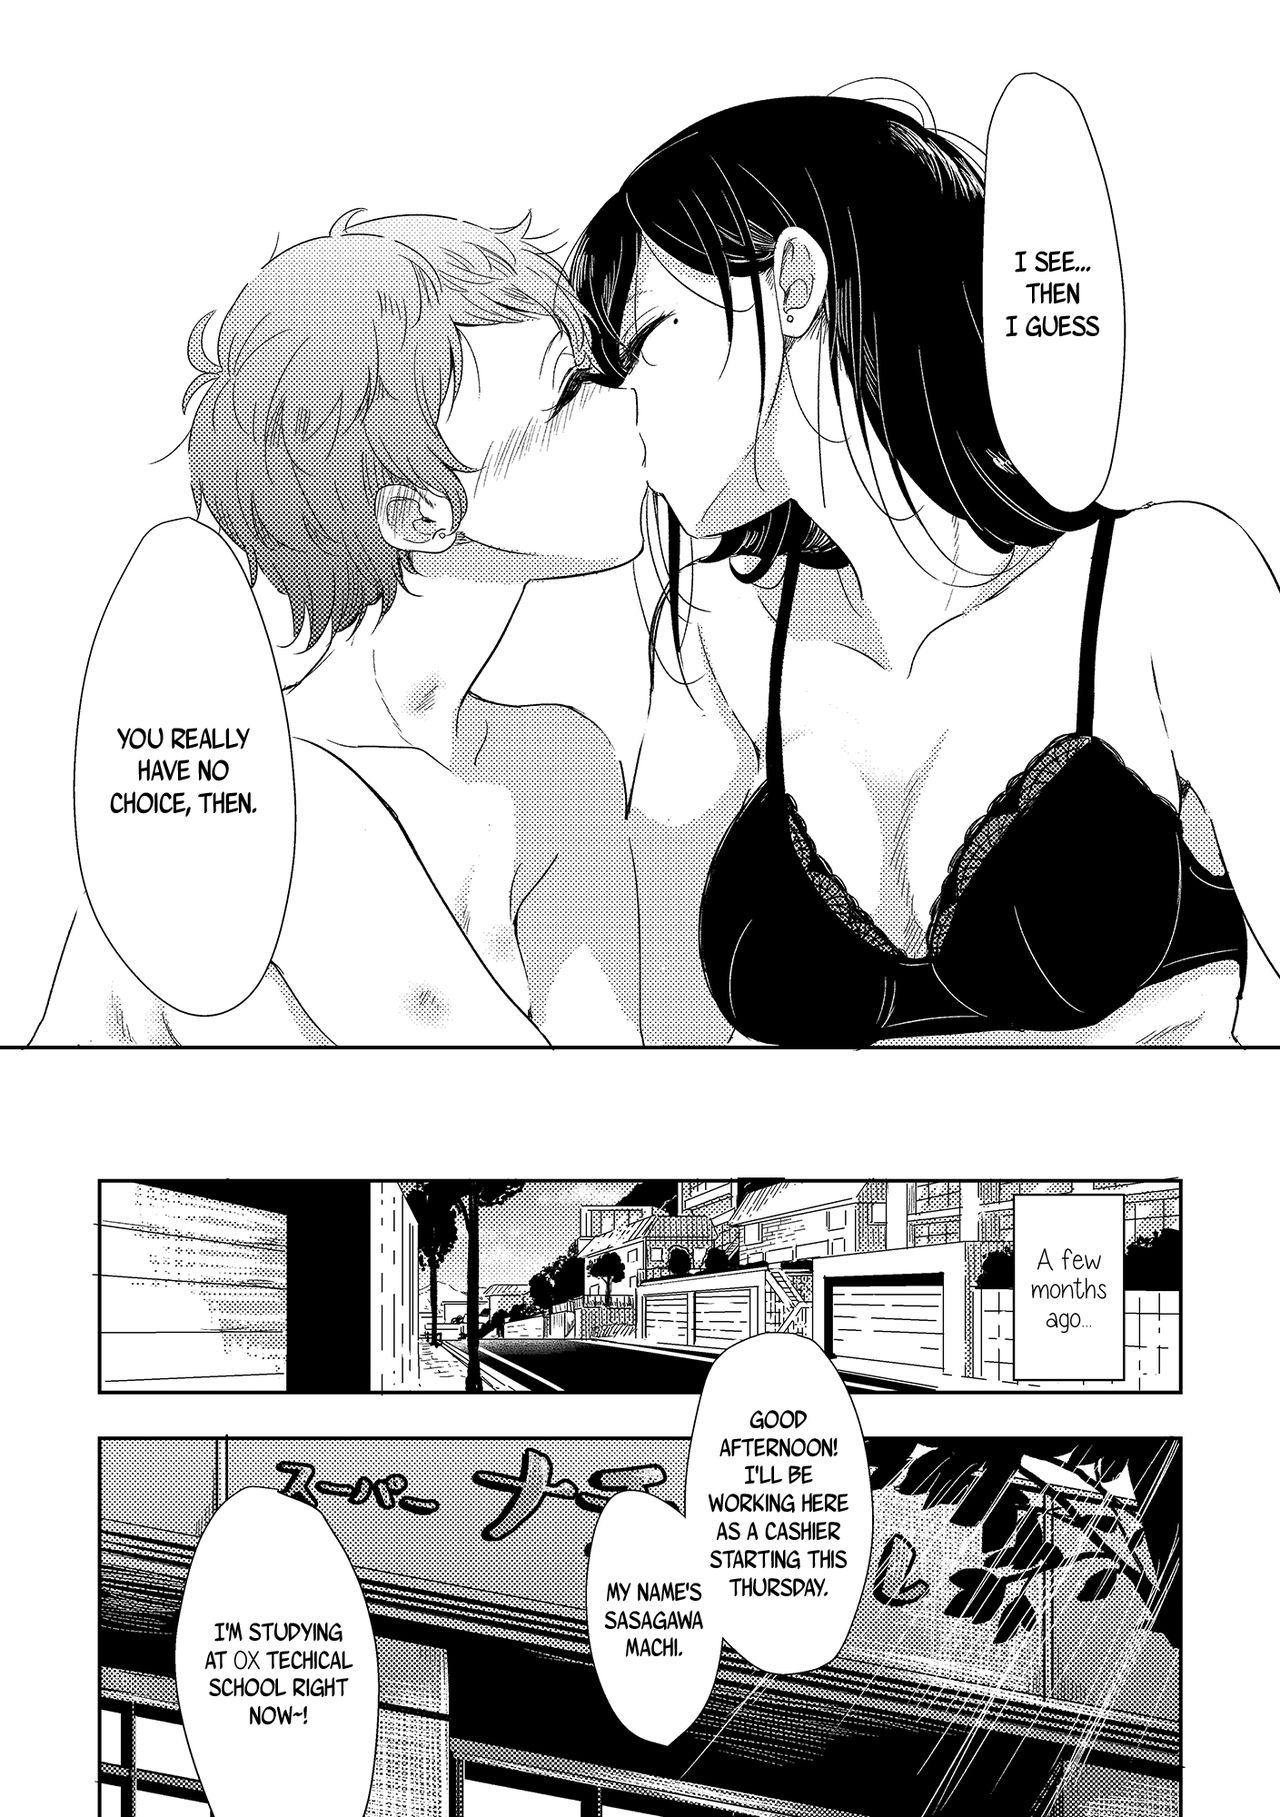 Cutie The Mysterious Kamiura-san - Original Toying - Page 3